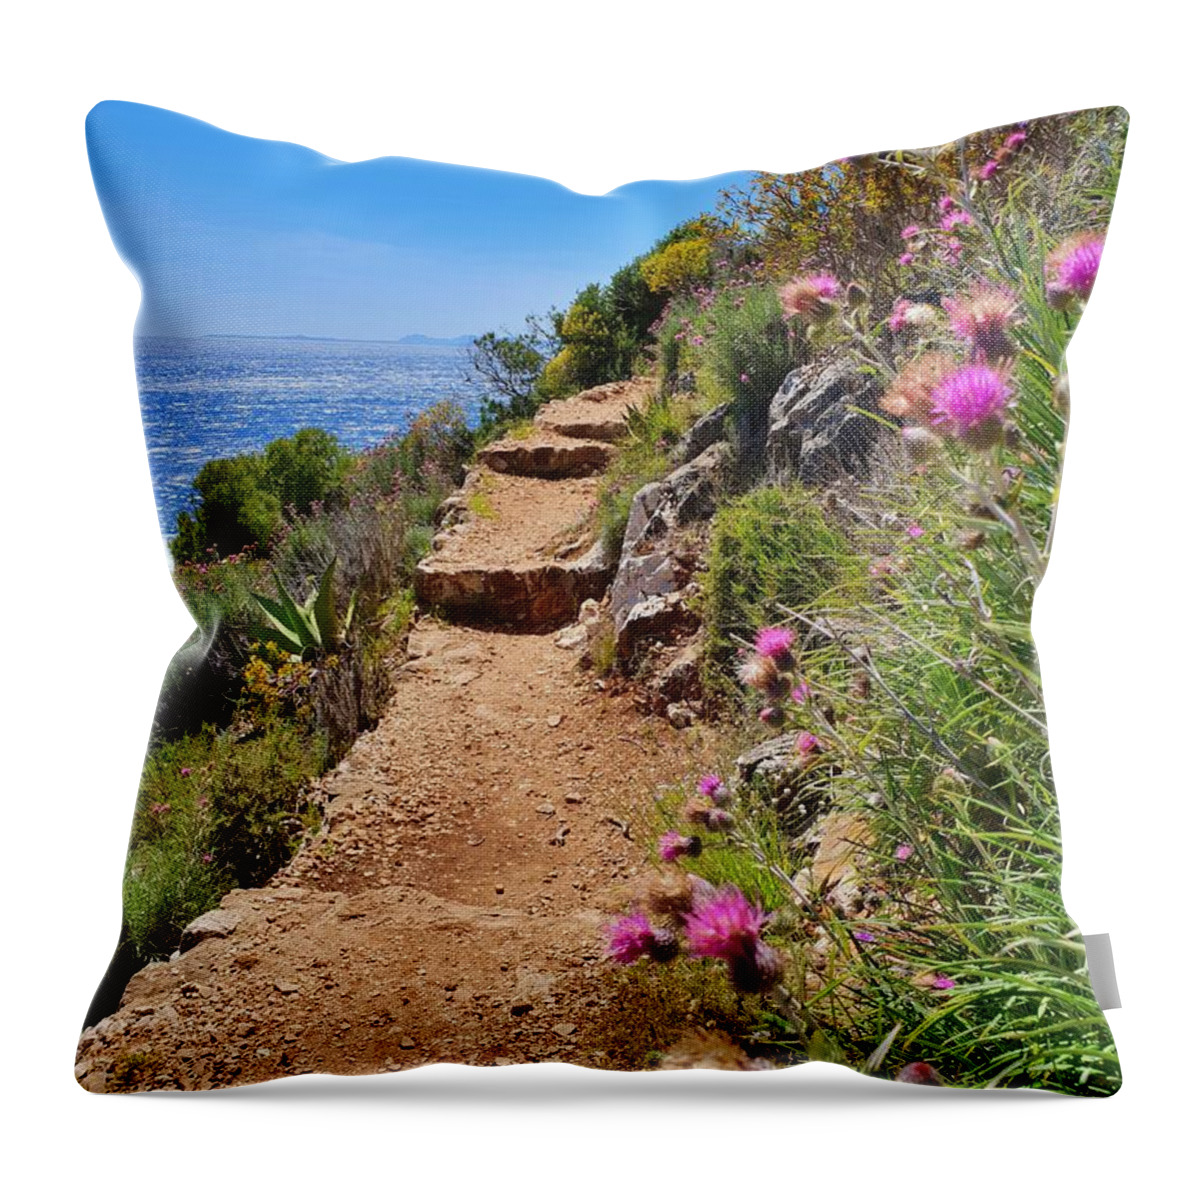 Landscape Throw Pillow featuring the photograph Hitting the Trail by Andrea Whitaker